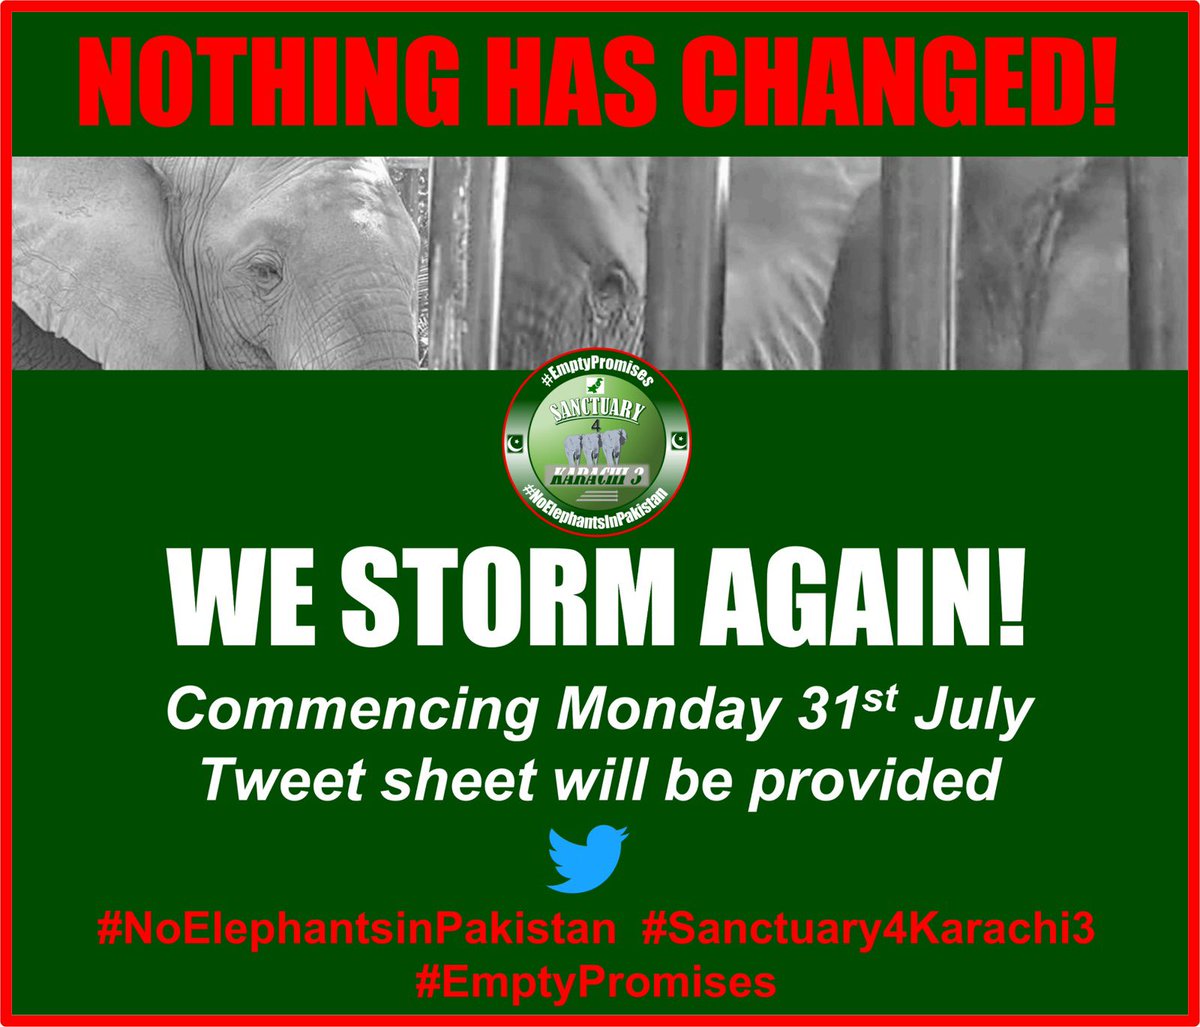 If you want to make a difference for these 3🐘 then please join the #TweetStorm 

Monday 31st July 2023 
Get active 
Get caring 
Get them out of 🇵🇰🇵🇰🇵🇰🇵🇰🇵🇰
#NothingHasChanged
#EmptyPromises